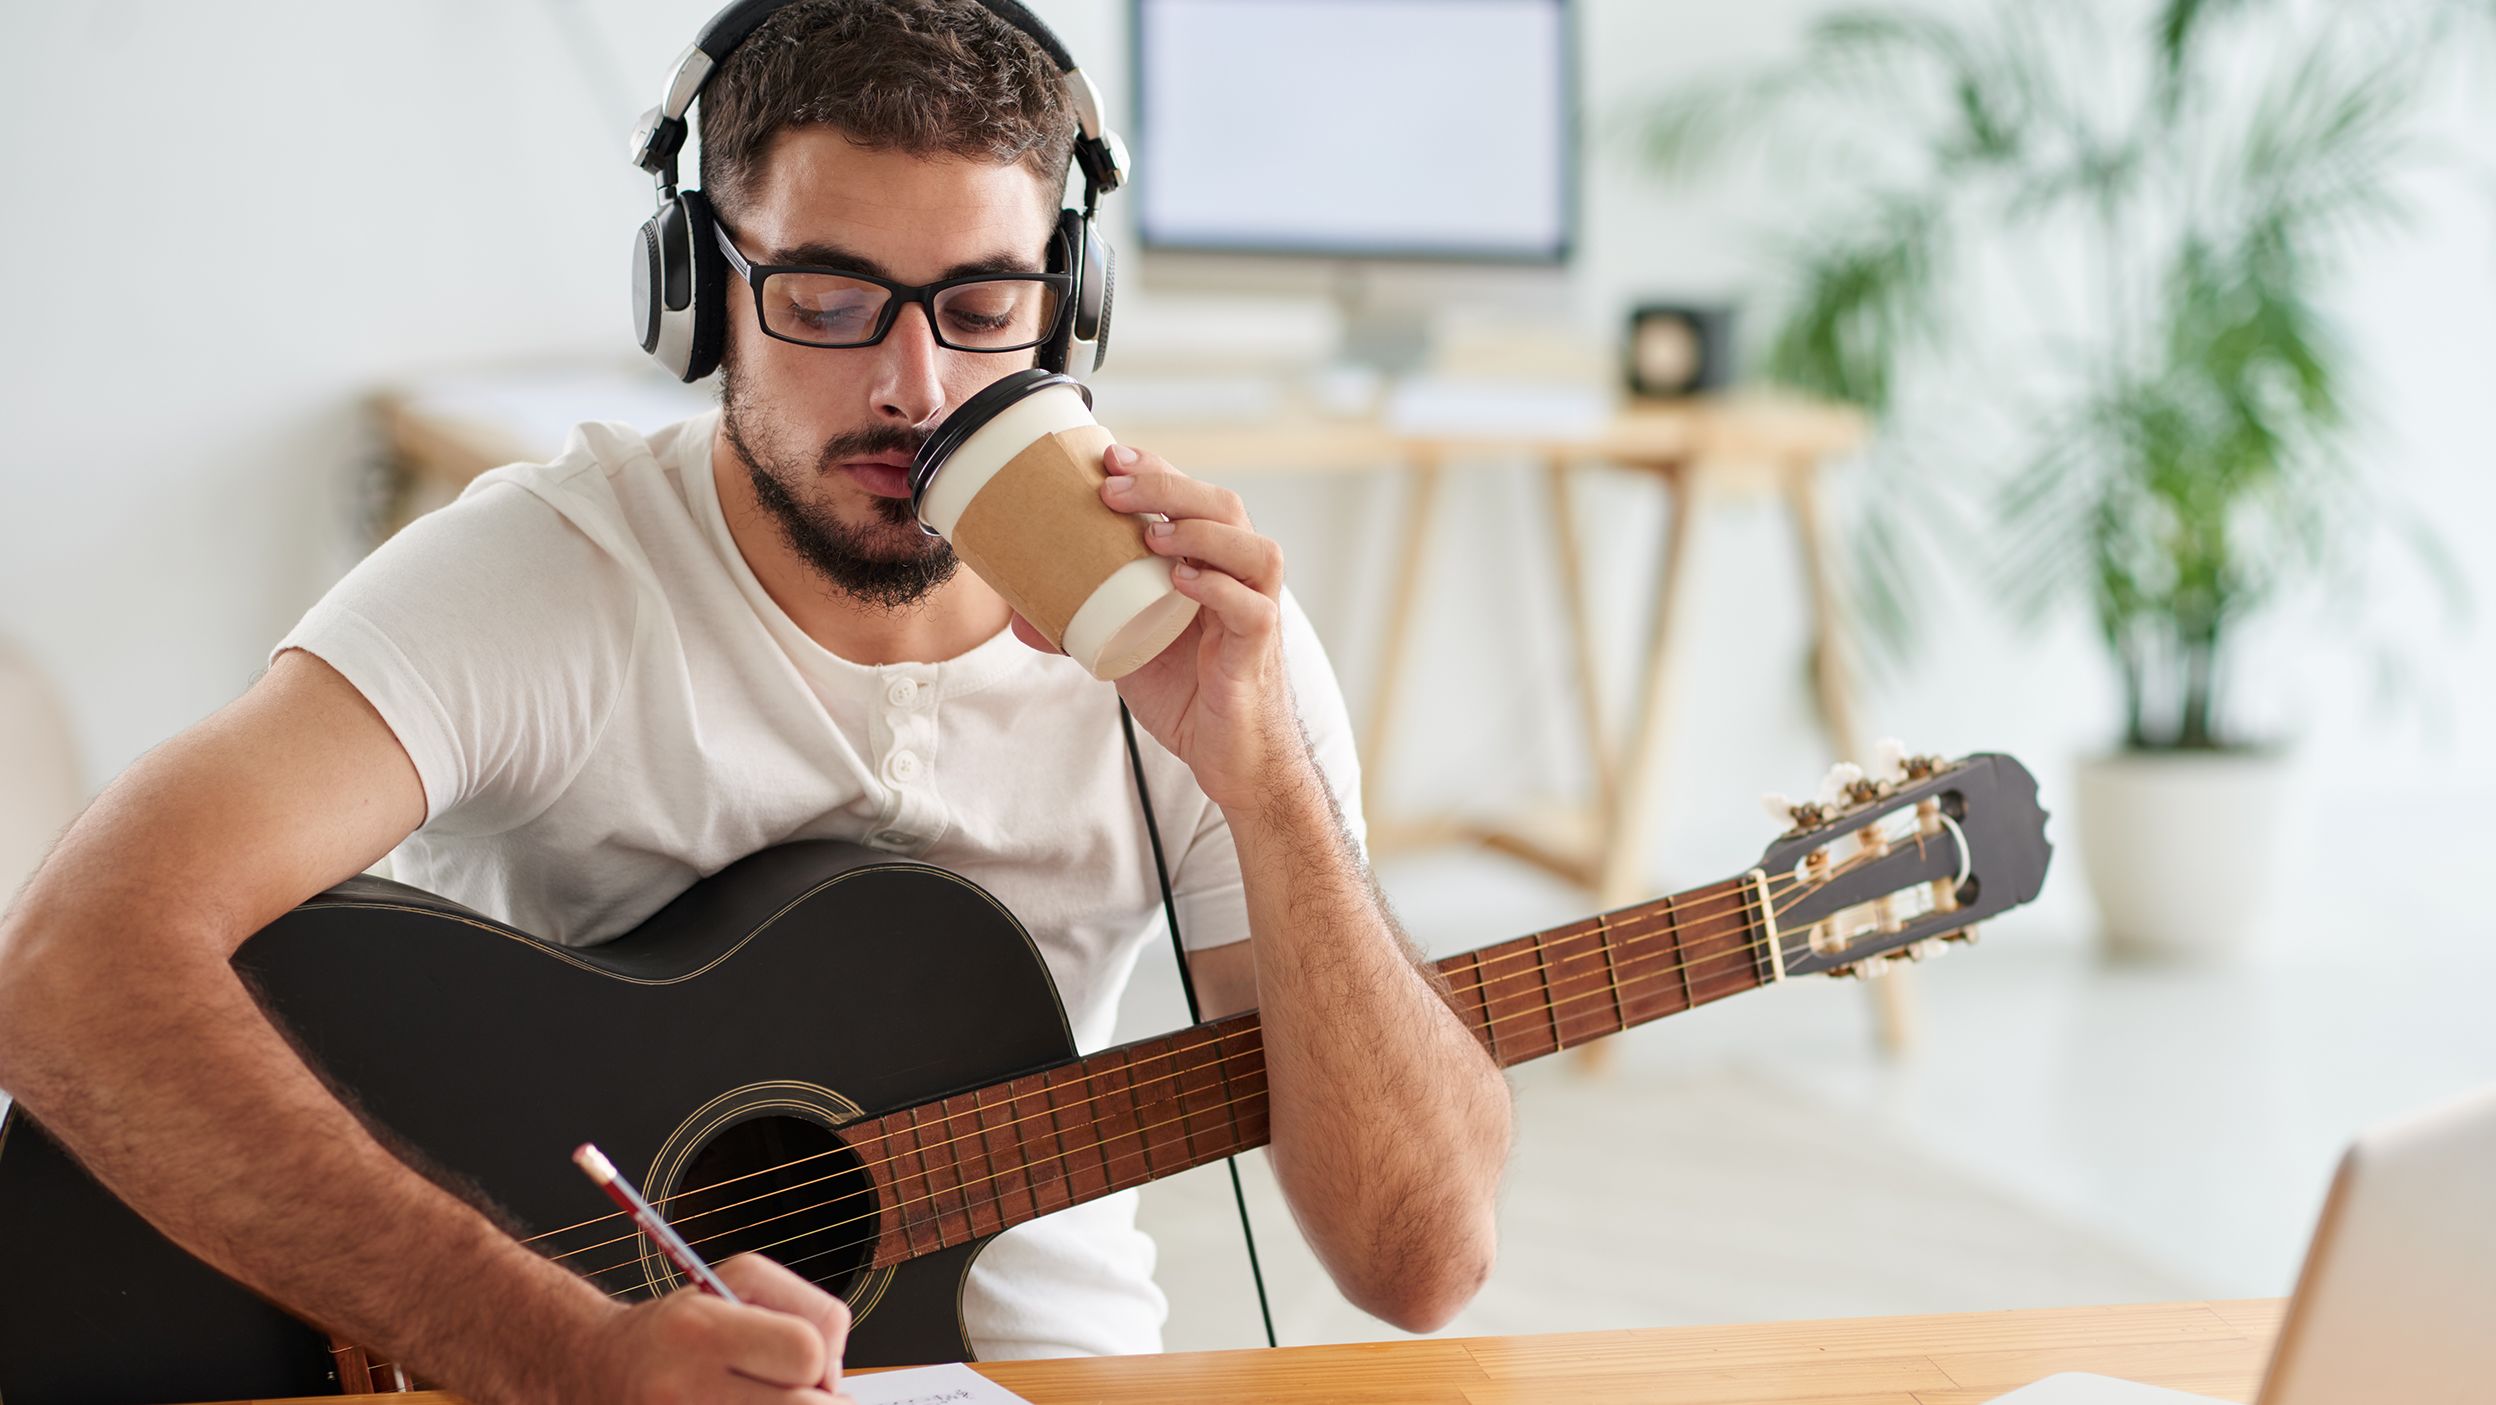 You'll learn how to read music for guitar and even how to pick up on what's going on musically, just by listening.